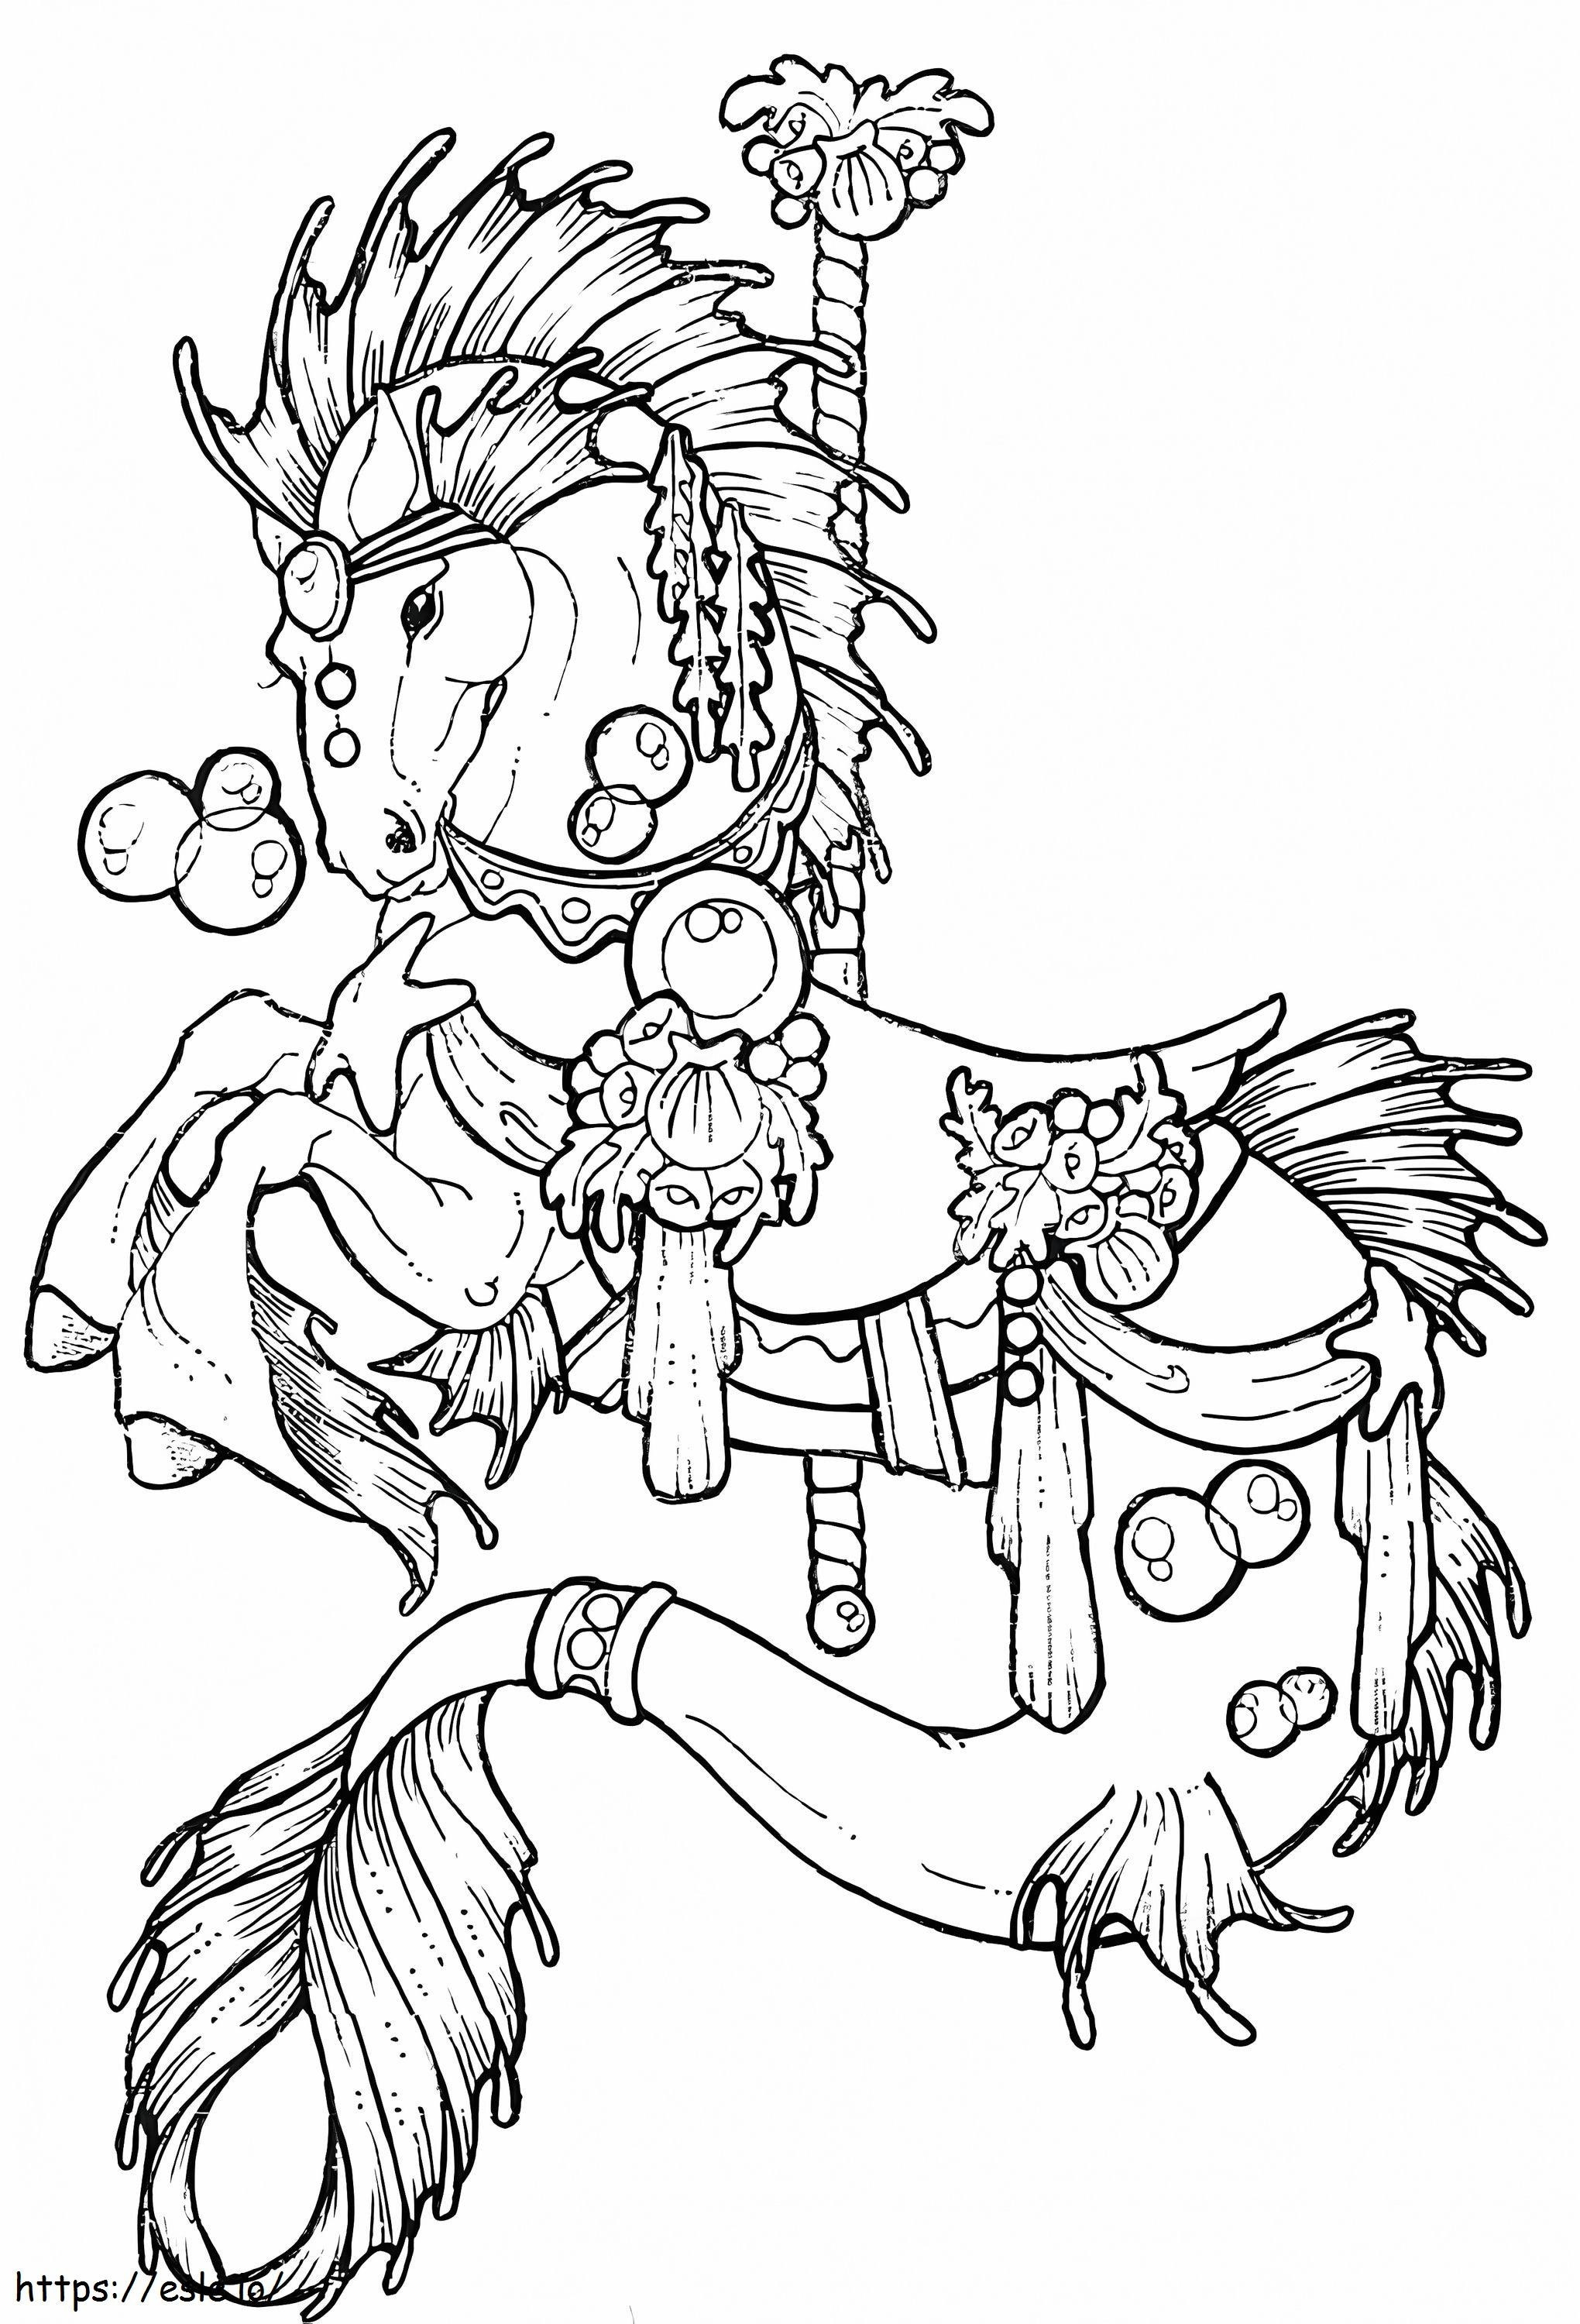 Awesome Carousel coloring page